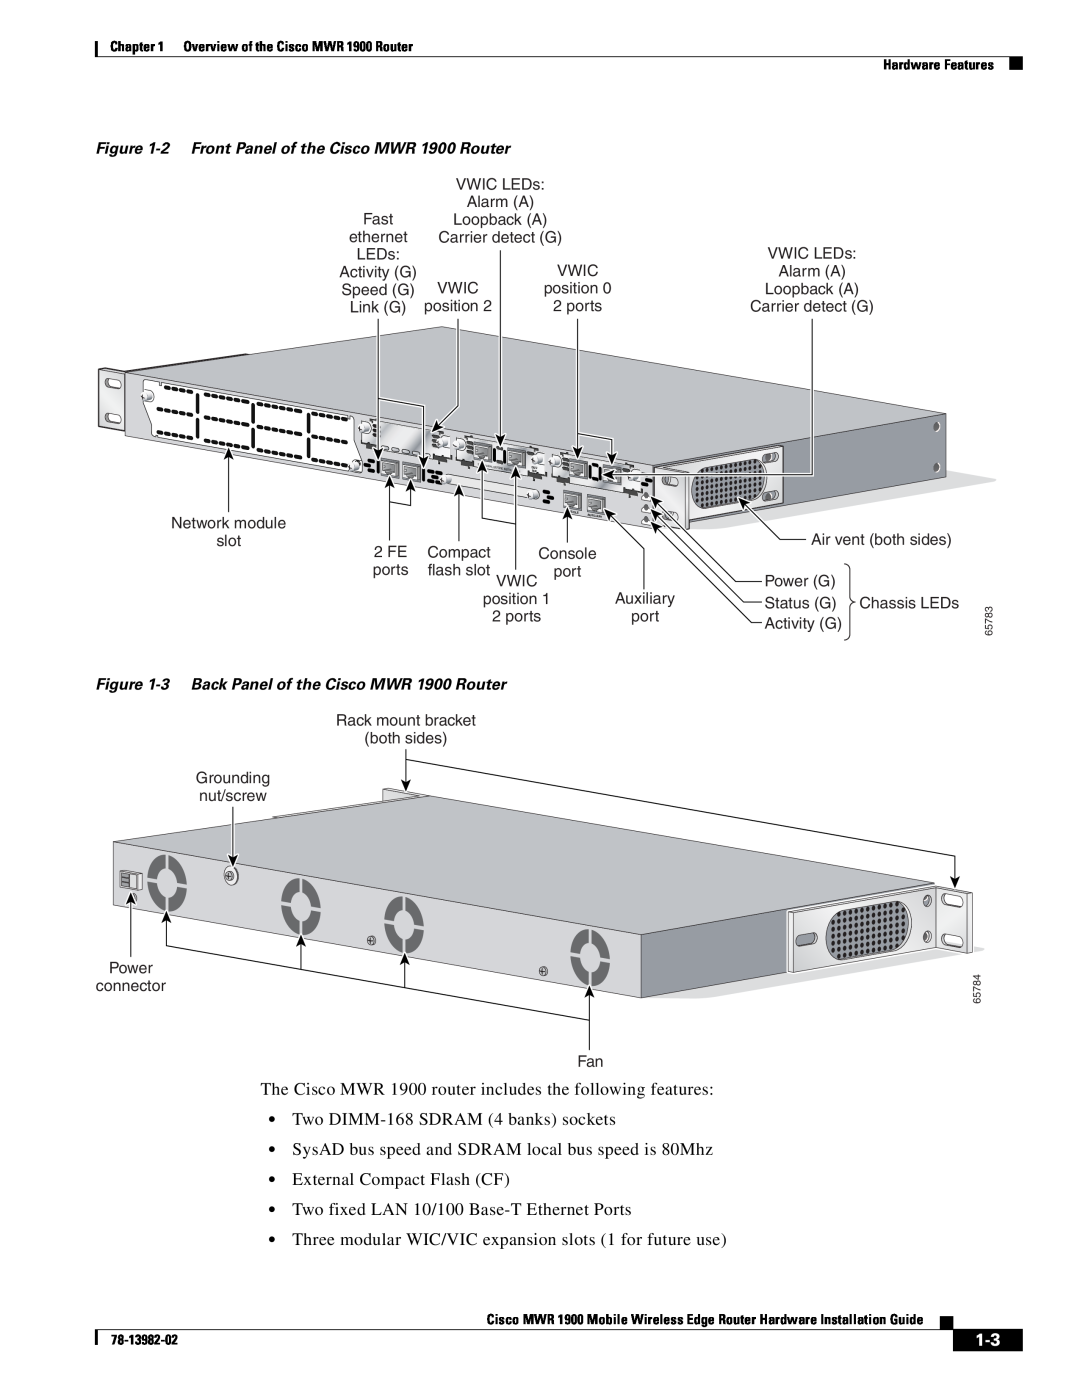 Cisco Systems manual The Cisco MWR 1900 router includes the following features, Two DIMM-168 SDRAM 4 banks sockets 